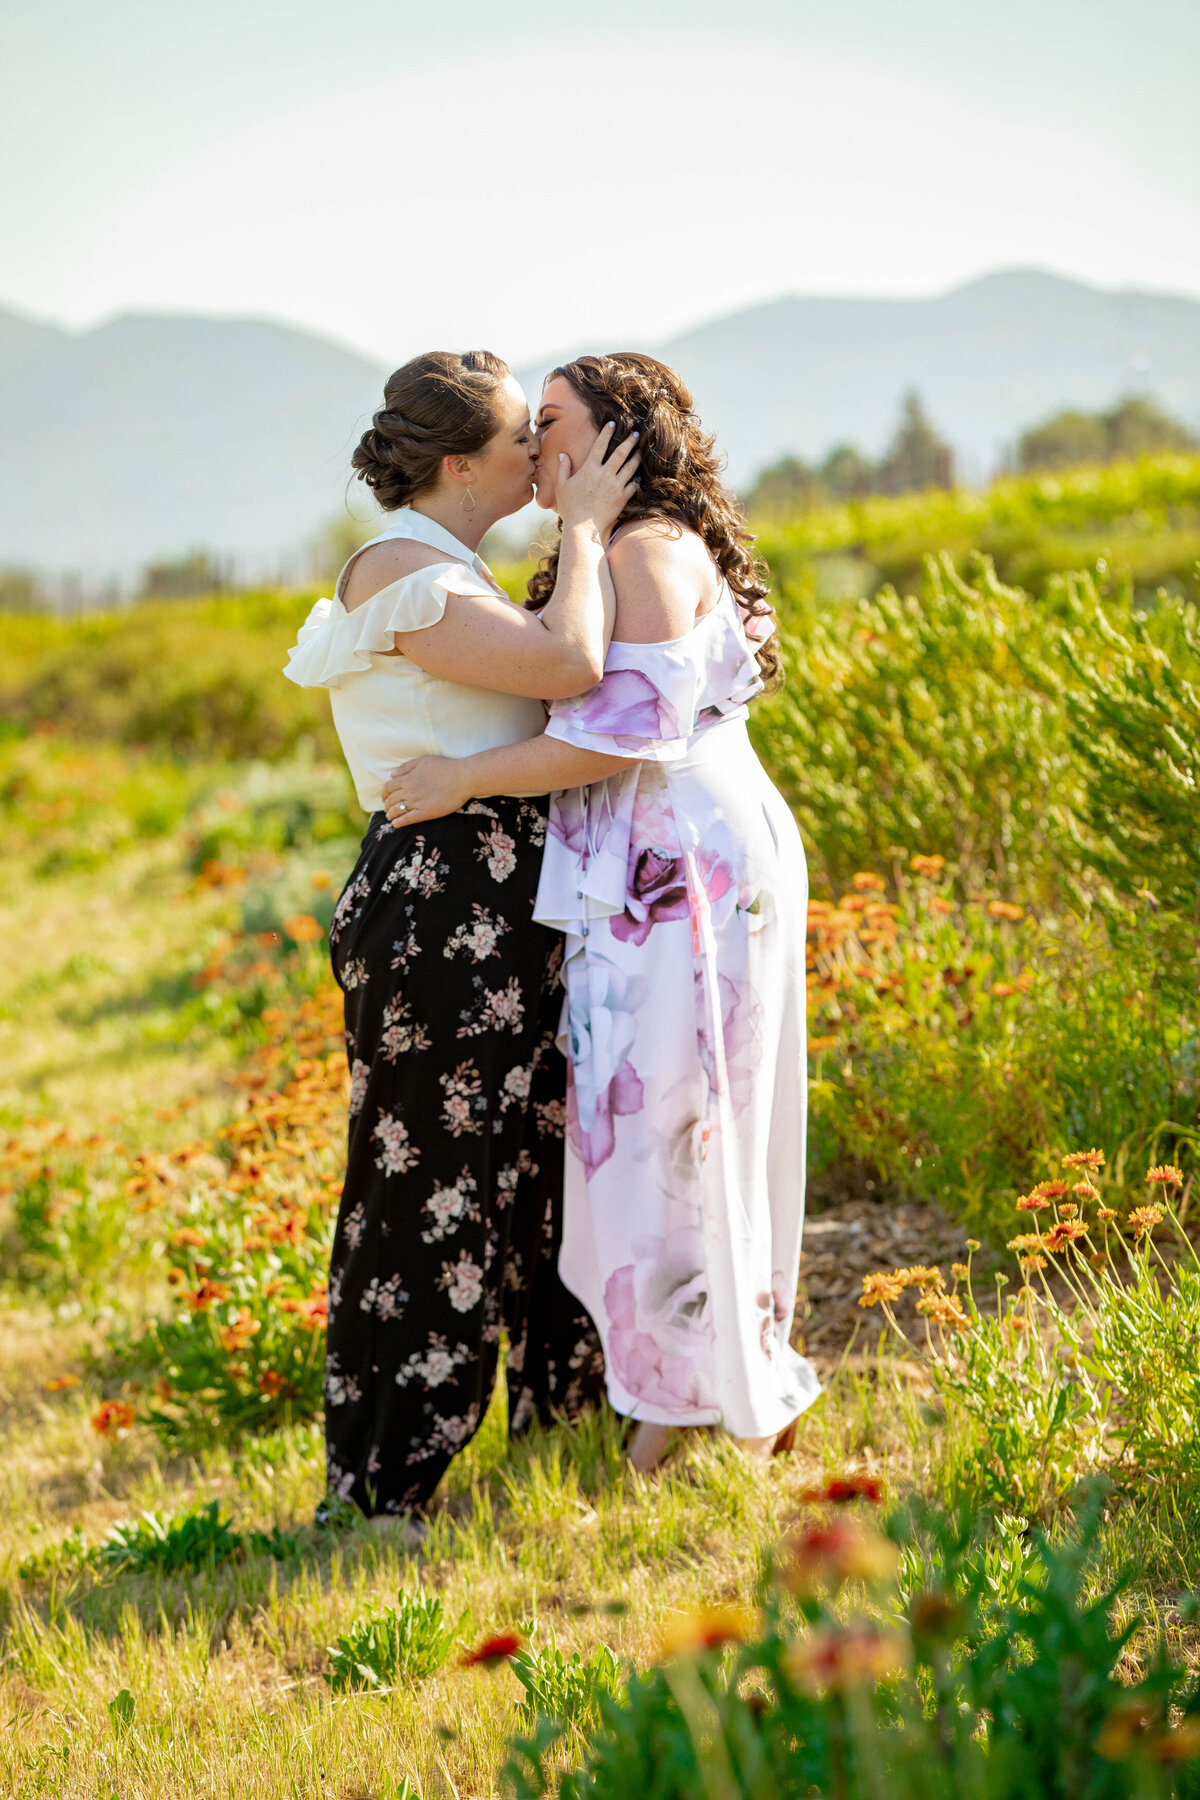 Two people kissing in a field.